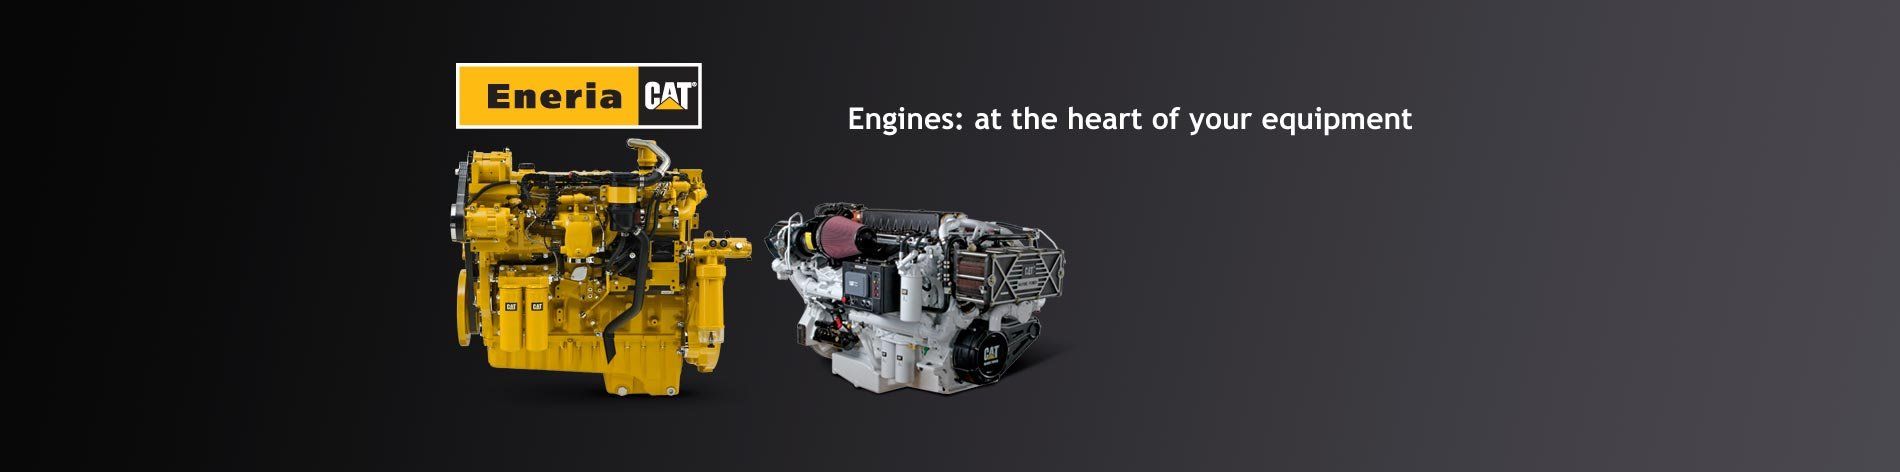 We conduct studies on the best ways to install and adapt Caterpillar engines designed for a wide range of applications in industry, rail transportation, agriculture, oil & gas exploration and development and marine engines.